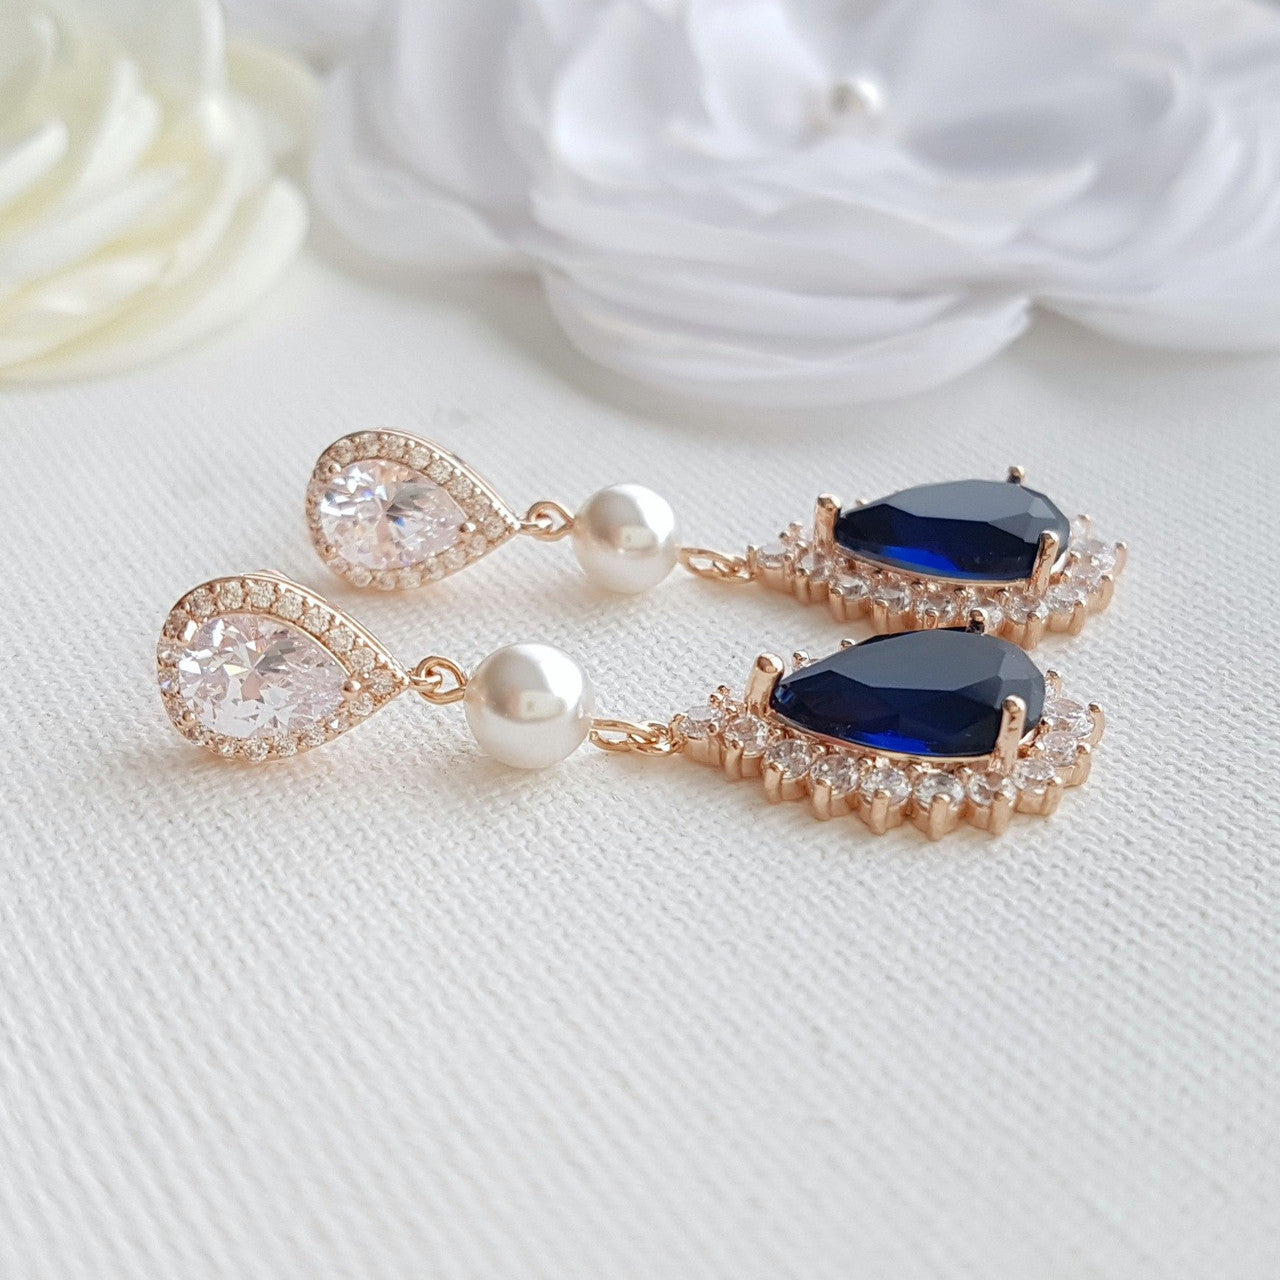 Rose Gold Blue Earrings with Pearls For Brides, Weddings, Events - Poetry Designs